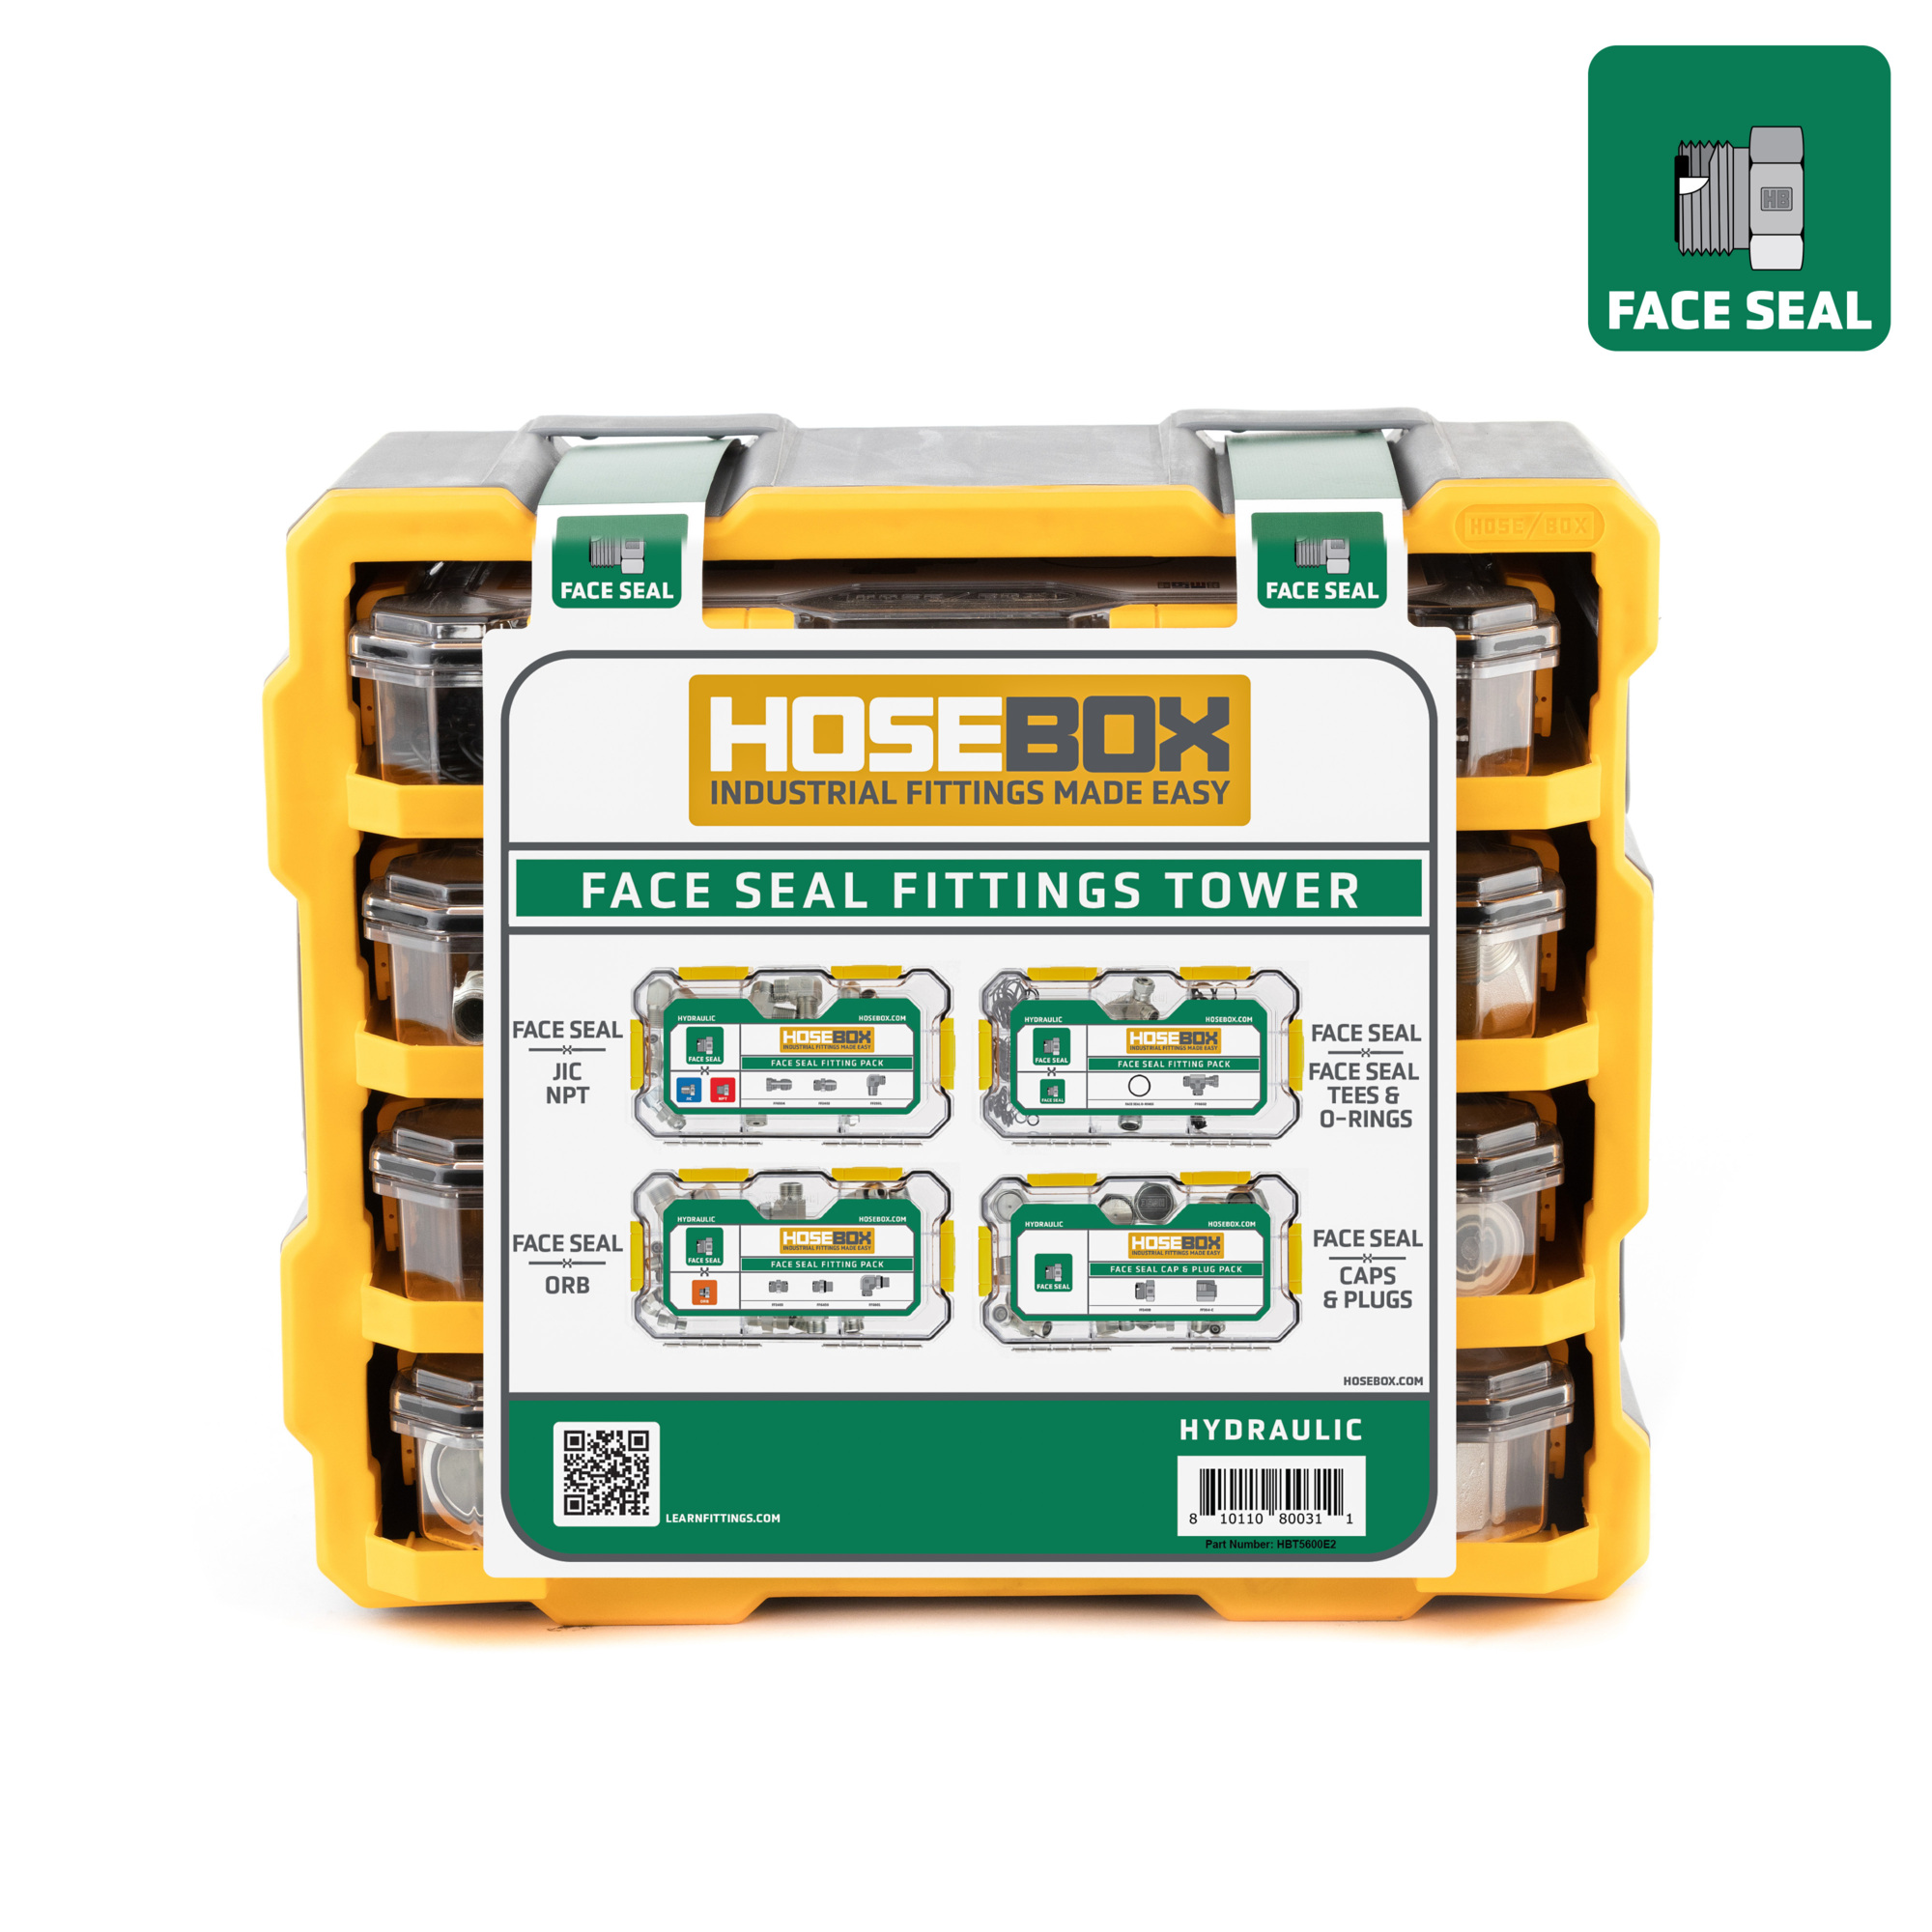 Hose Box, FACE SEAL Fitting Tower, Fitting Size Other in, Model HBT5600E2